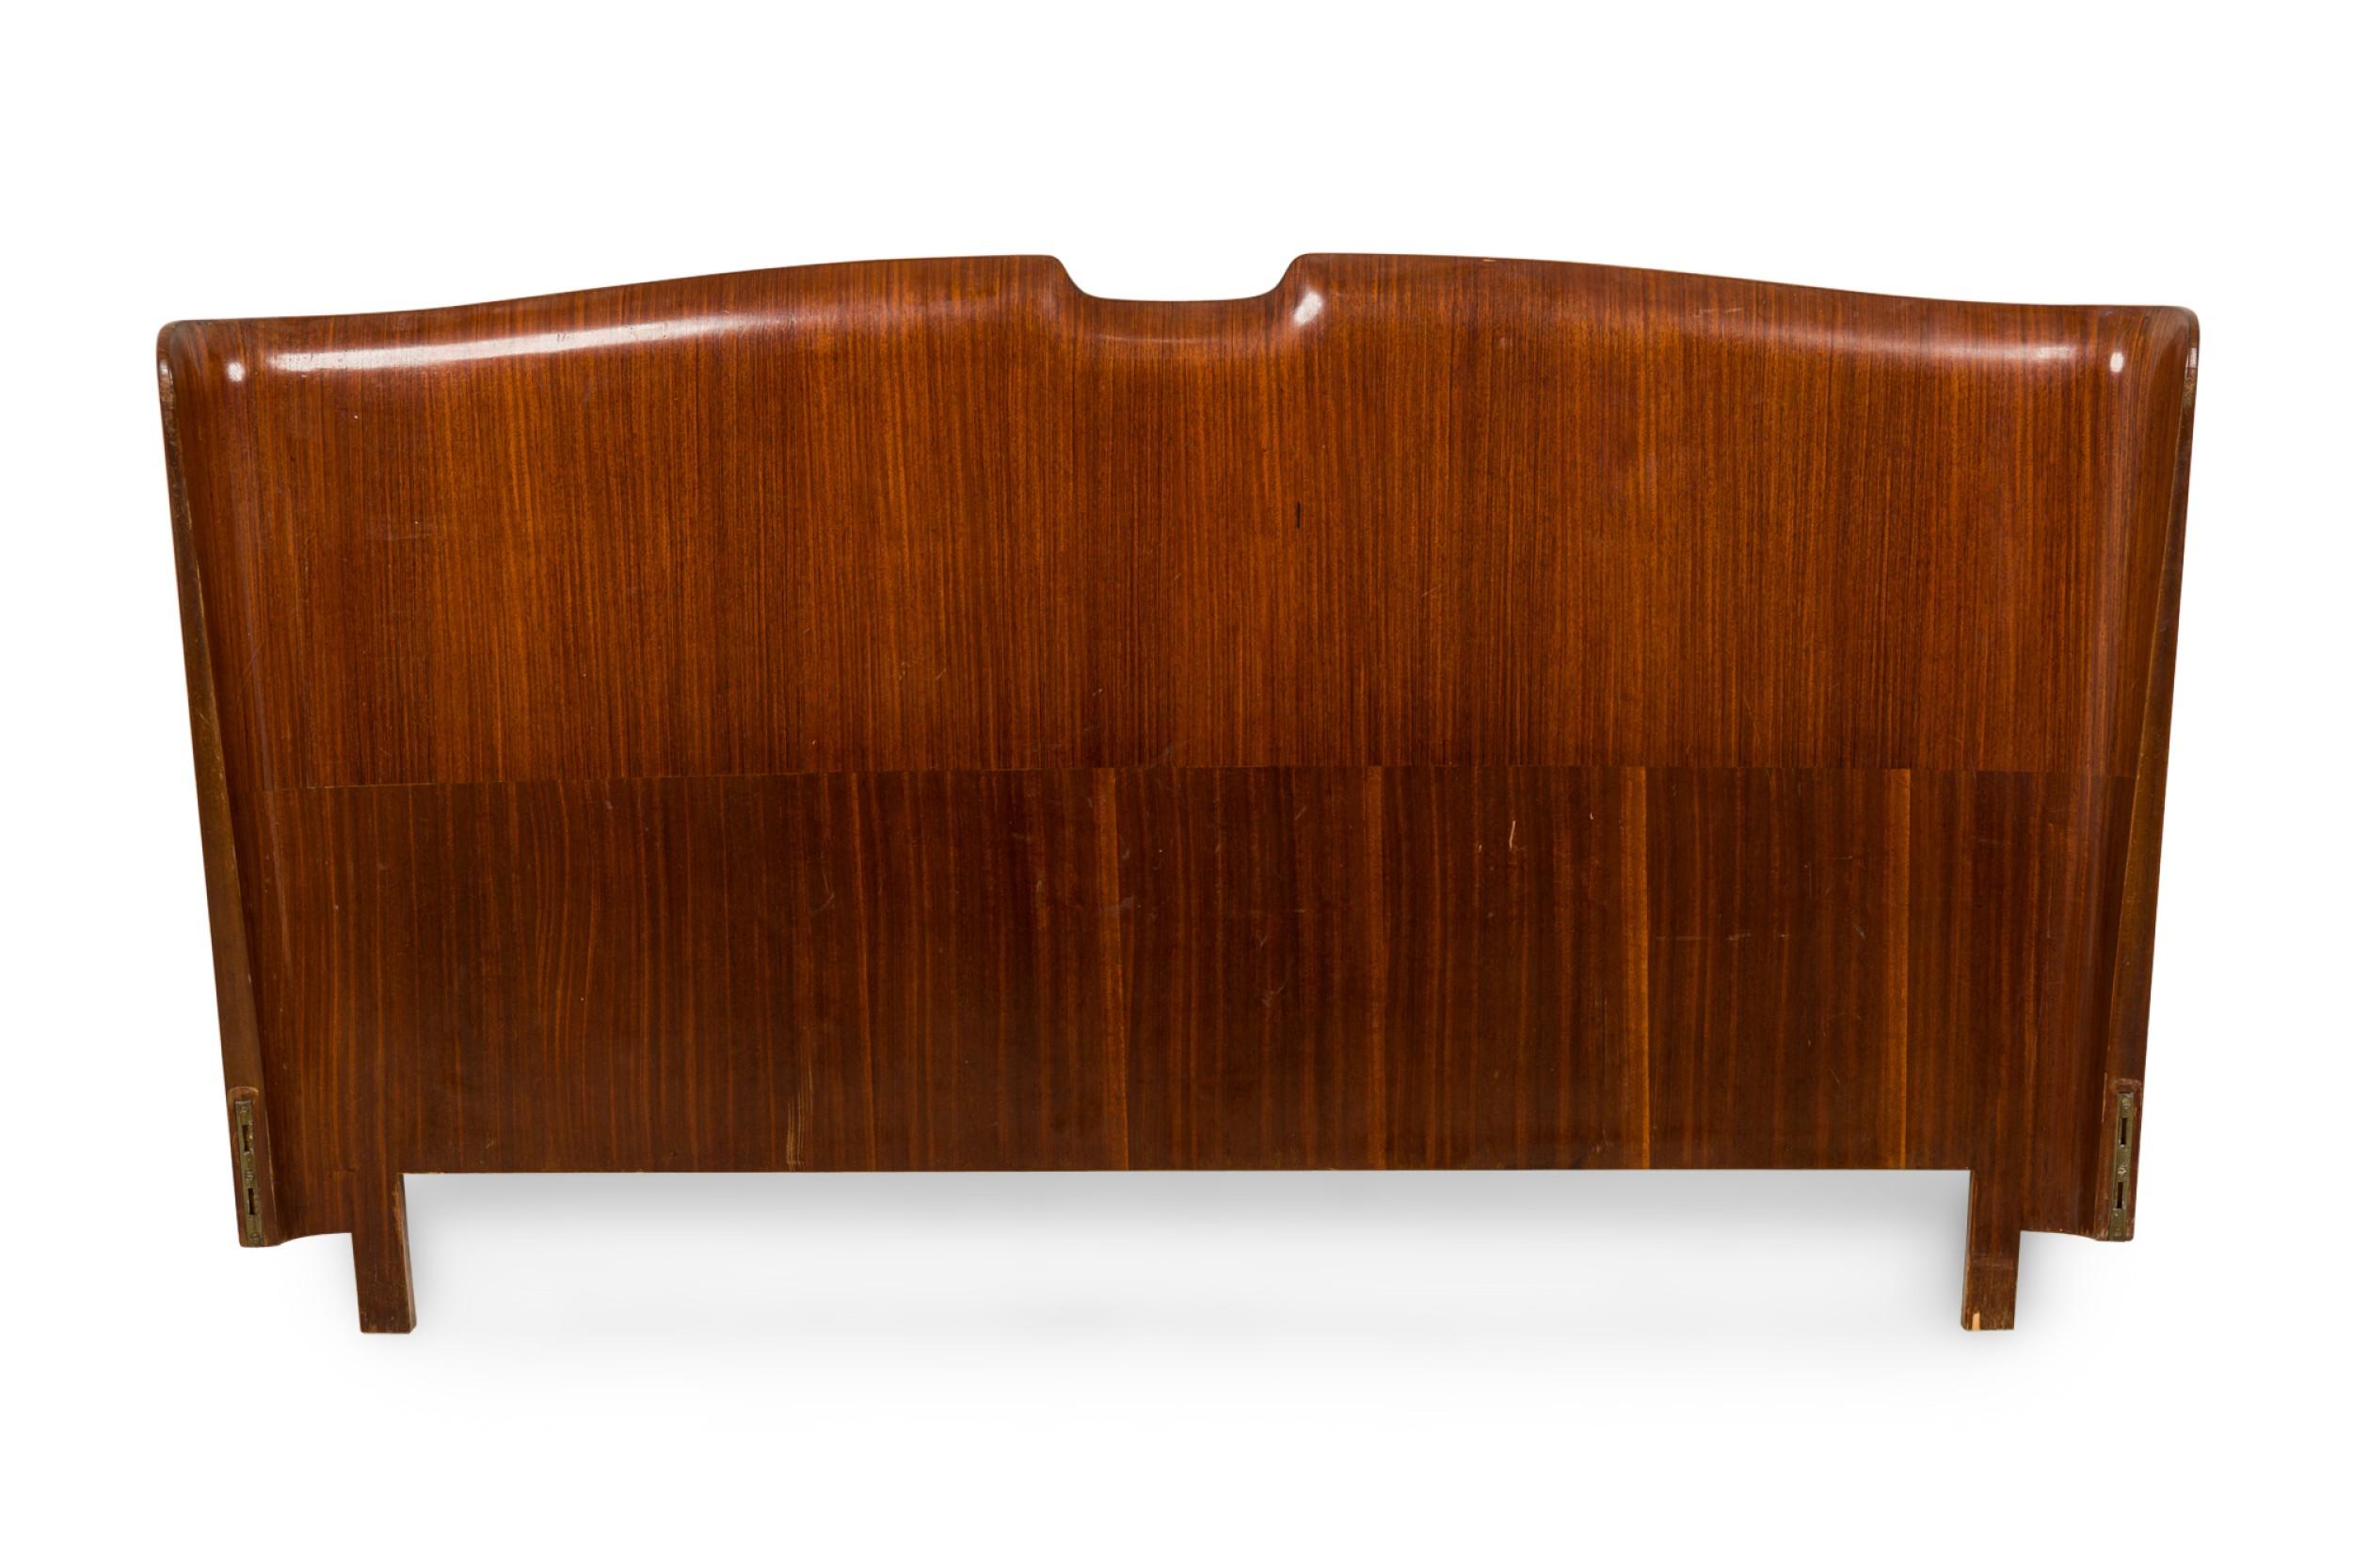 Italian Mid-Century mahogany queen size bed with a shaped top having an indented center on the headboard and footboard with a V design veneer (PAOLO BUFFA) (headboard, footboard -19high, 2 rails) NOTE: could be adapted without rails to California